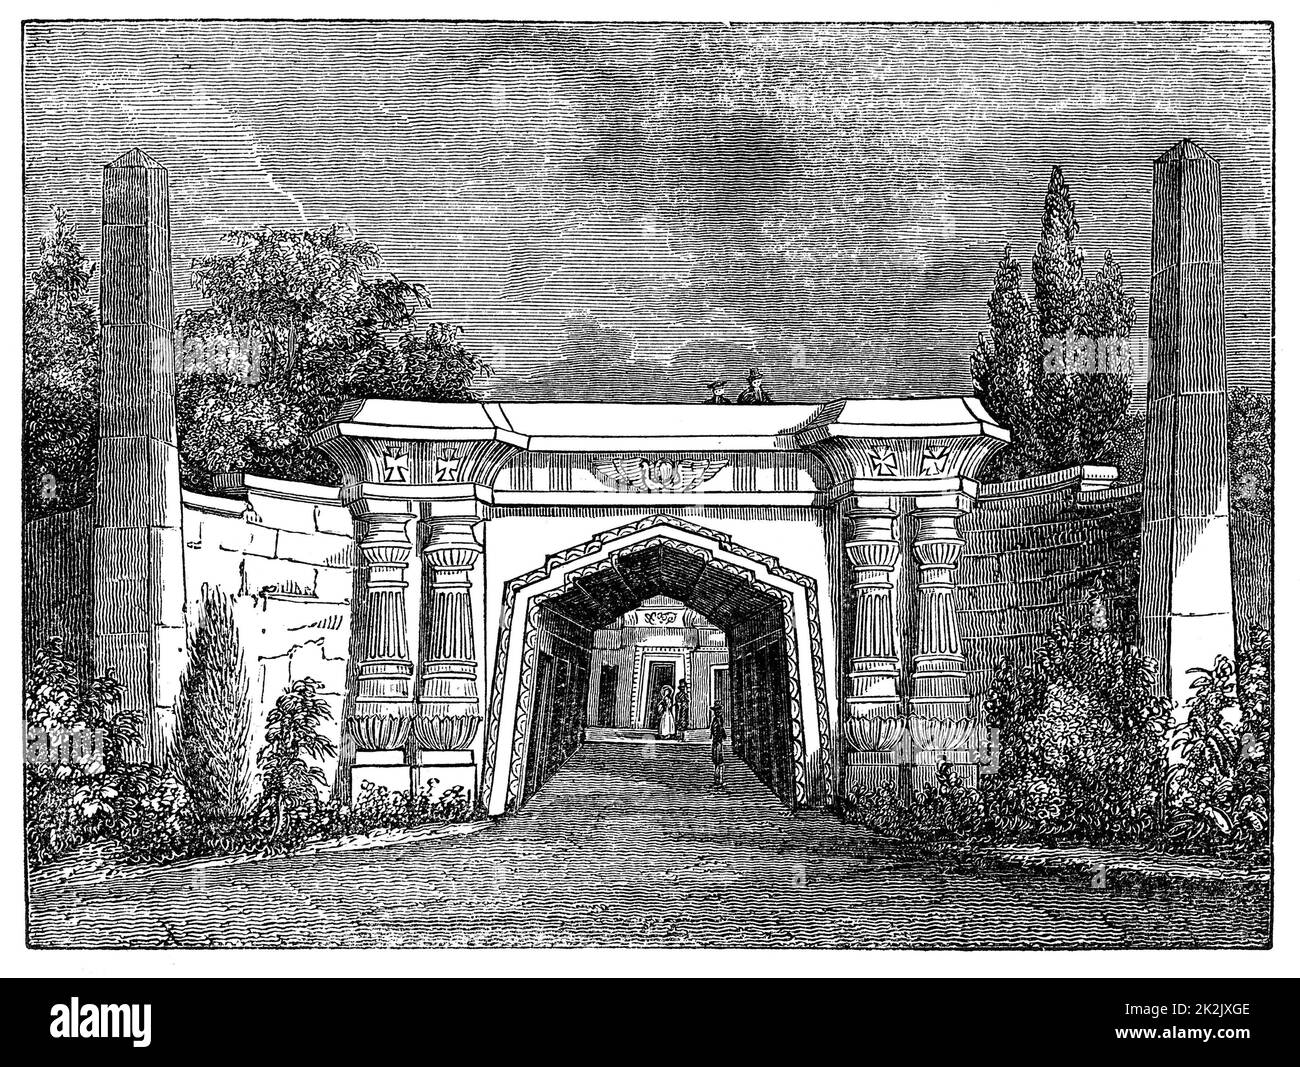 North London Cemetery, Highgate, London, England. The Egyptian avenue, built in the architectural style fashionable at this time. Wood engraving, 1838 Stock Photo